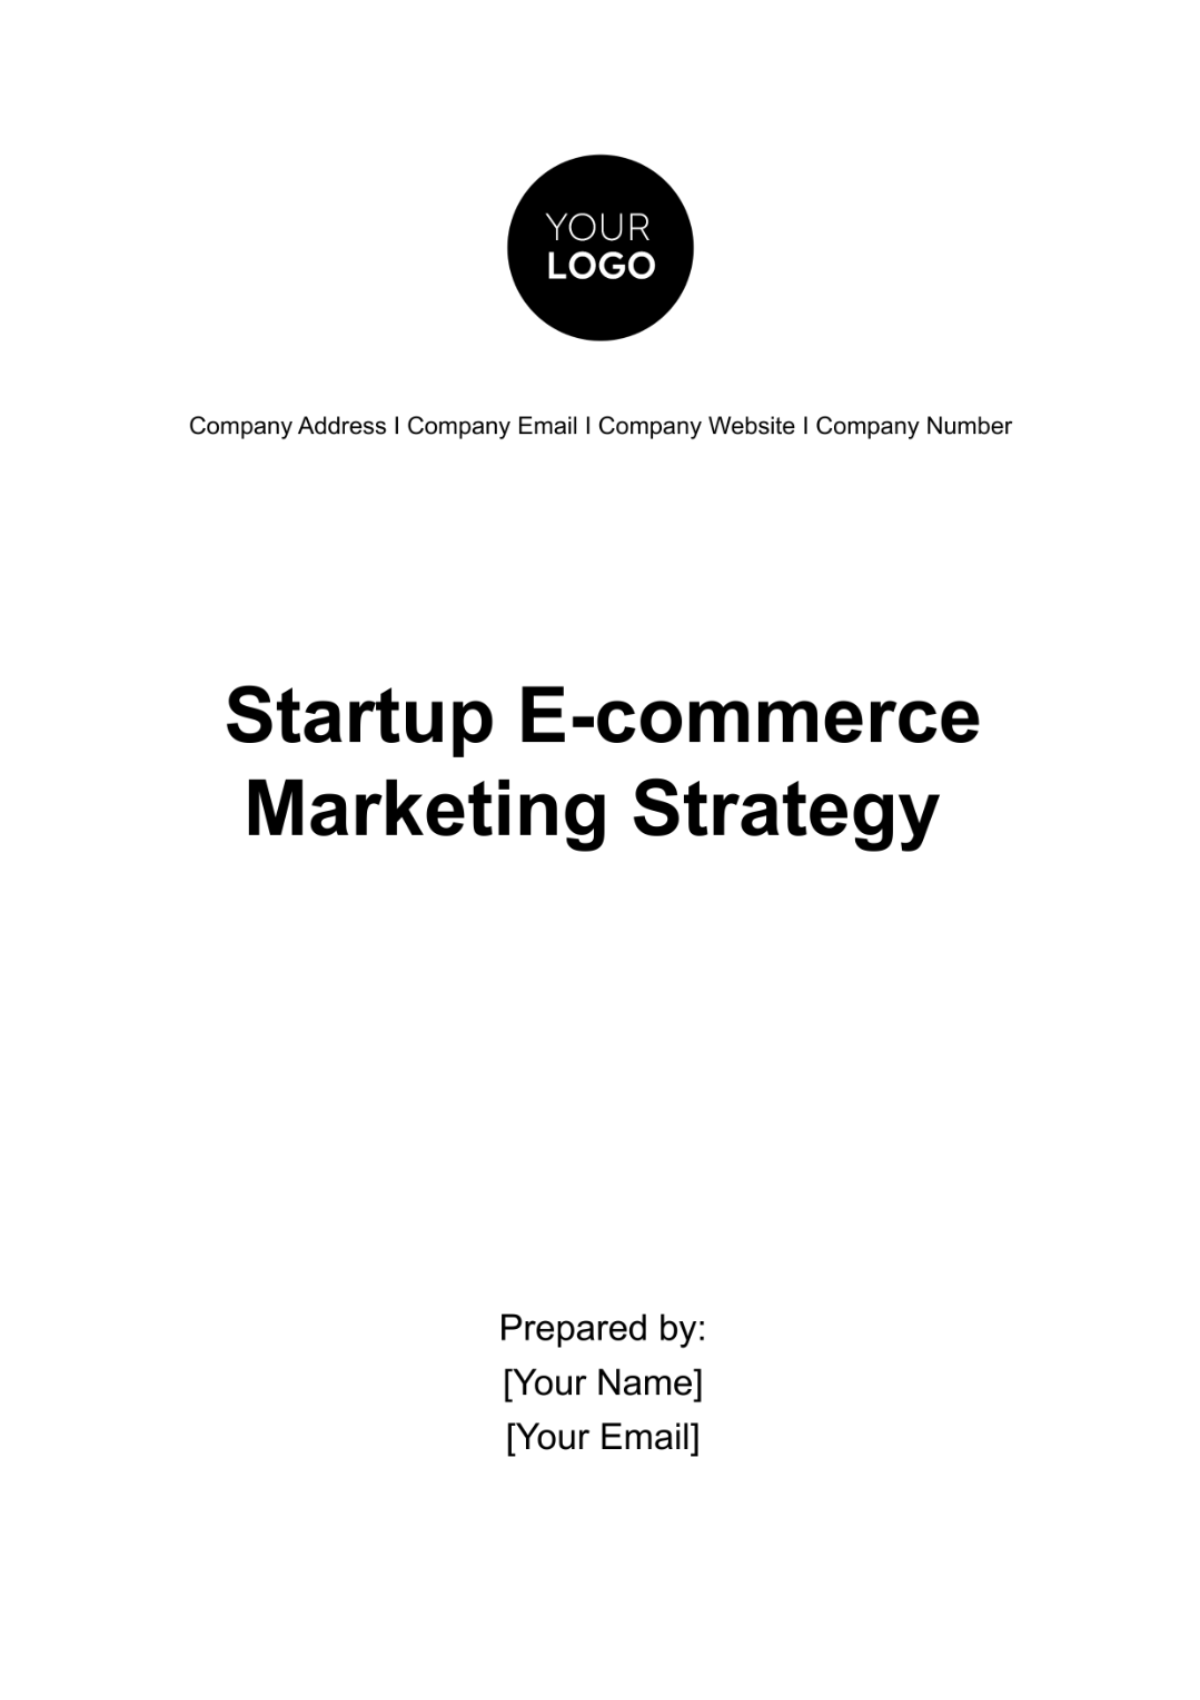 Startup E-commerce Marketing Strategy Template